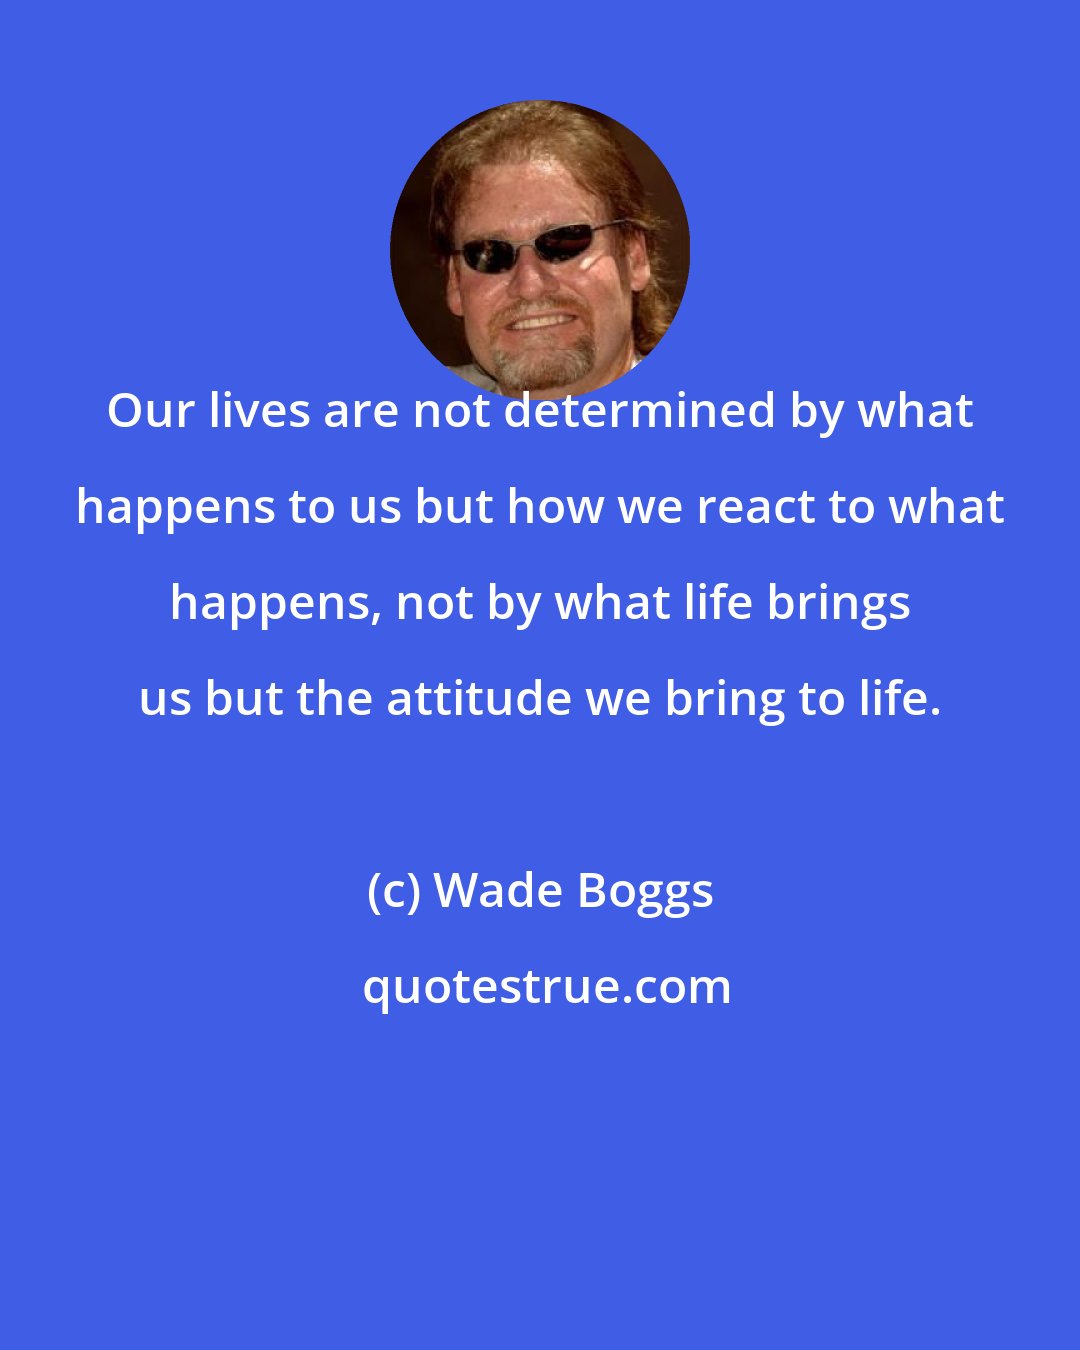 Wade Boggs: Our lives are not determined by what happens to us but how we react to what happens, not by what life brings us but the attitude we bring to life.